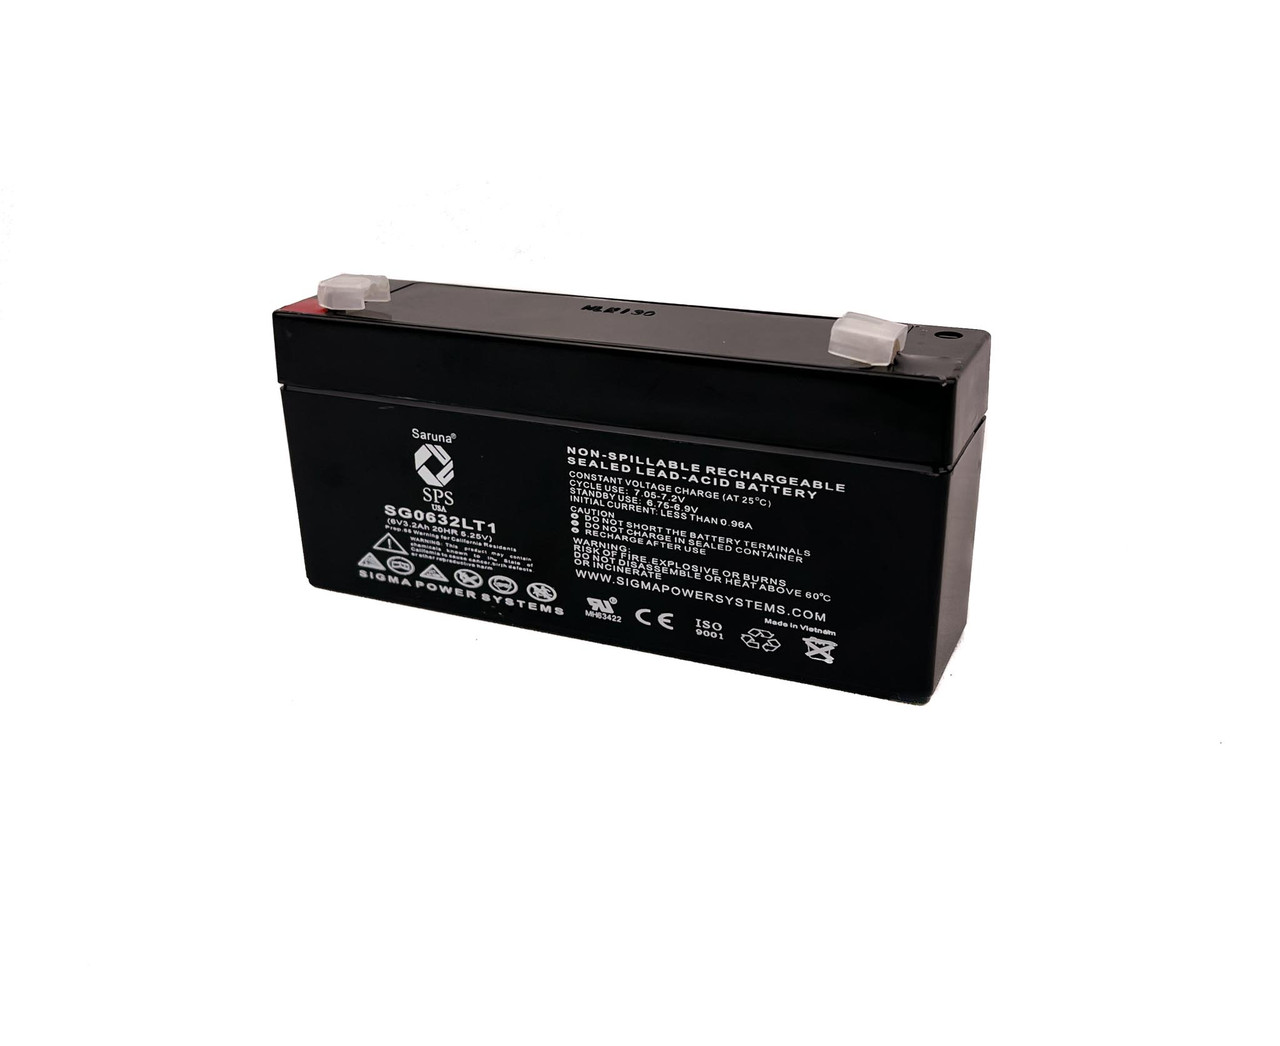 Raion Power 6V 3.2Ah Non-Spillable Replacement Rechargebale Battery for Seward Medical 9911 E.C.G.